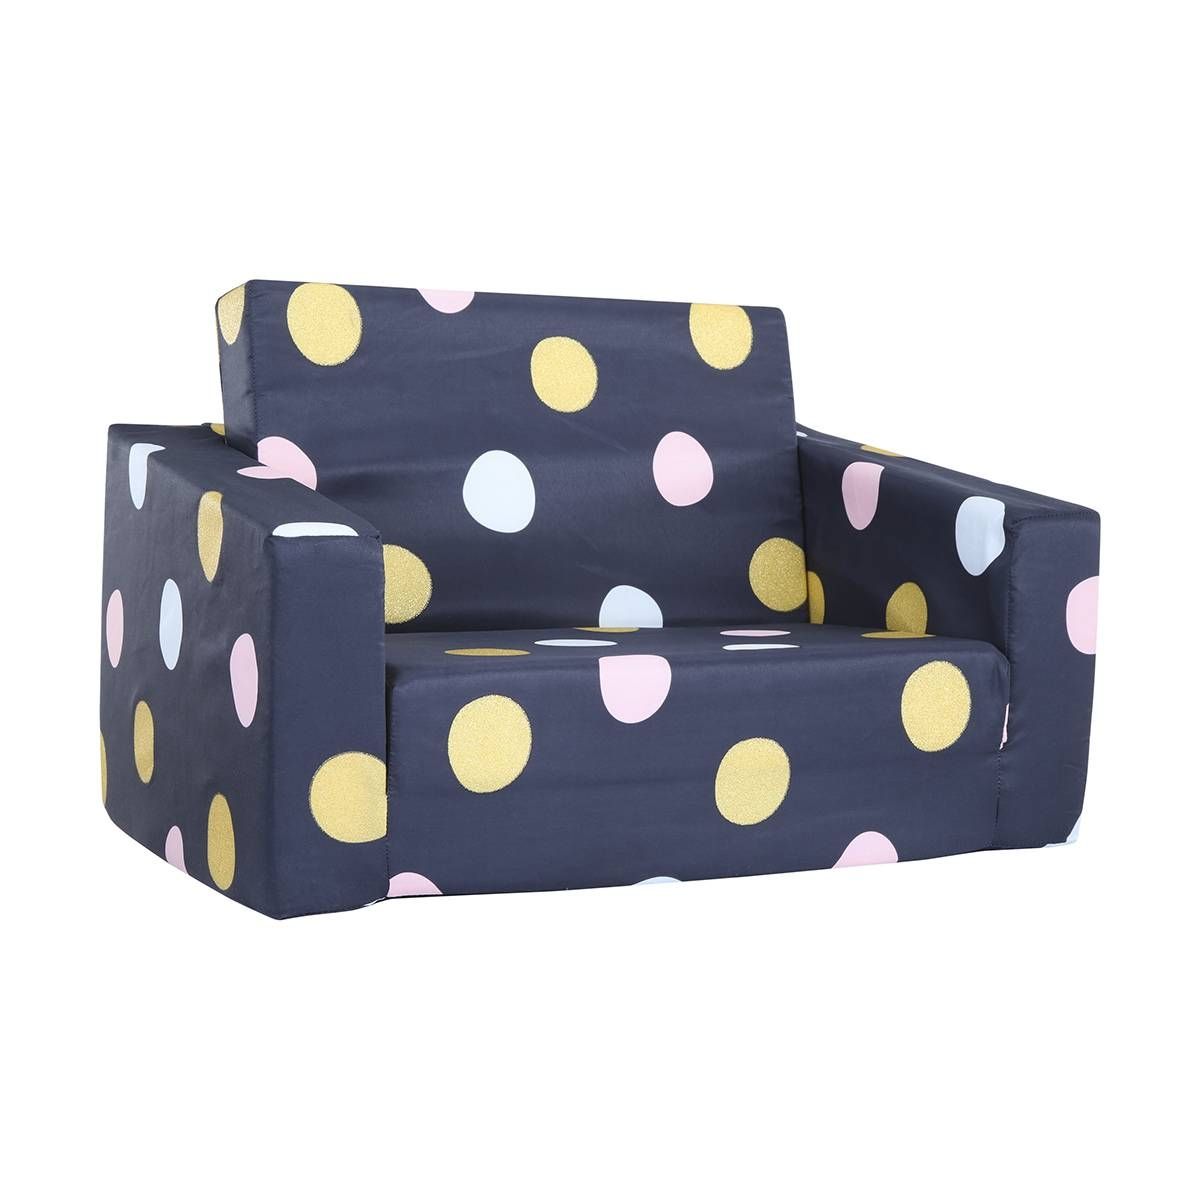 Flipout Sofa – Blue With Spots | Kmart In Flip Out Sofa For Kids (Photo 7 of 30)